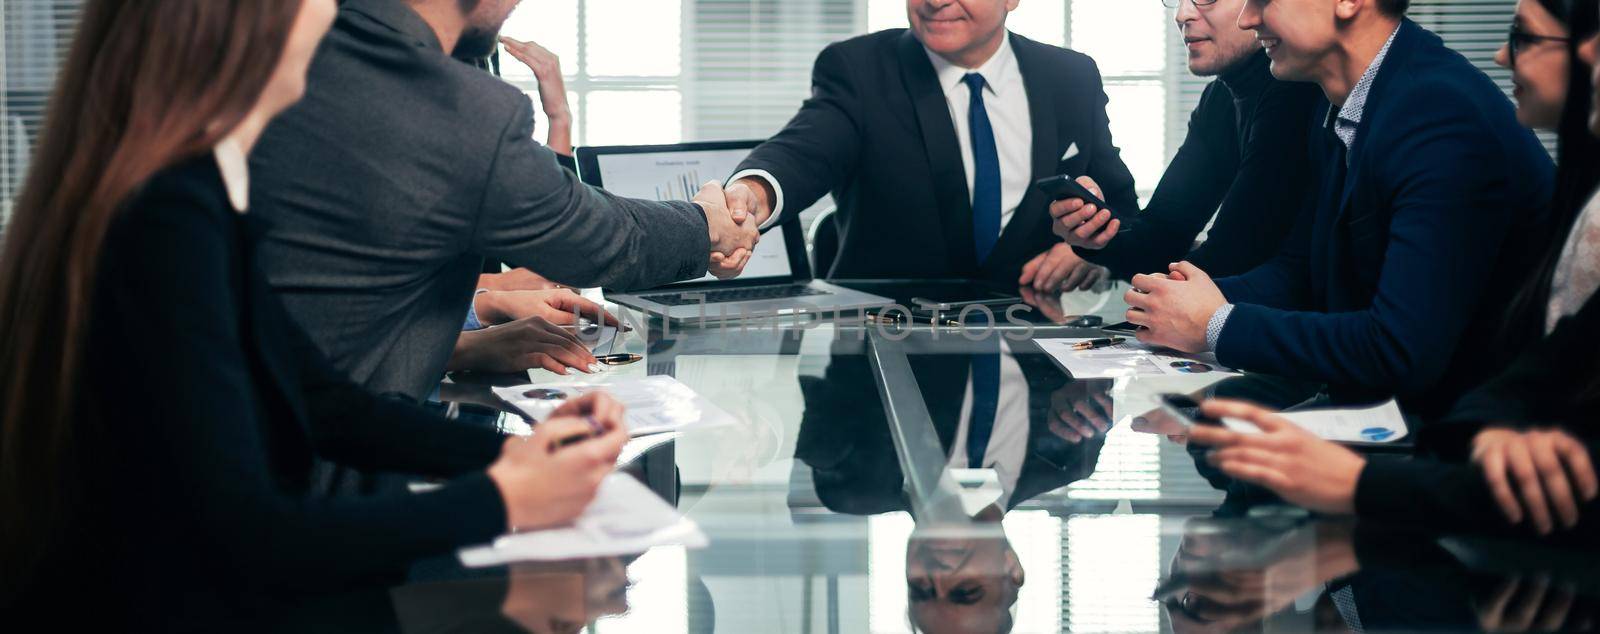 business partners shaking hands during a working meeting. concept of partnership